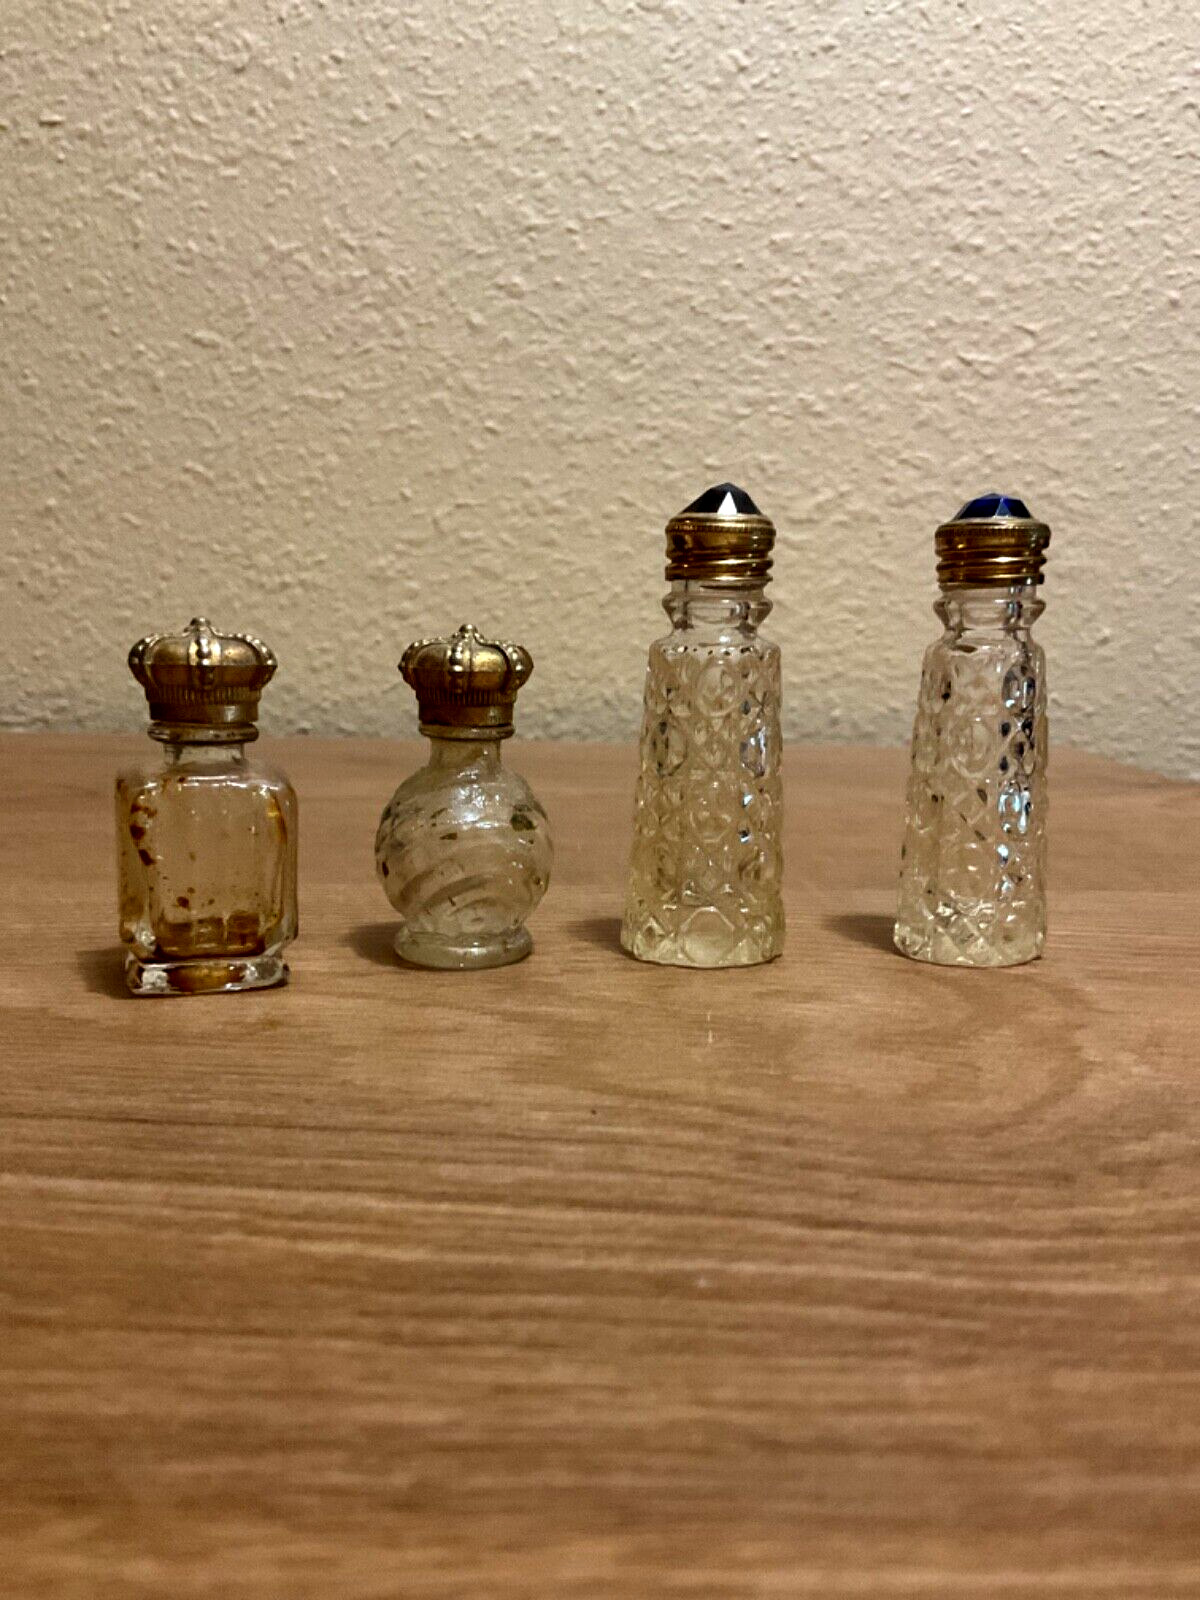 4 ANTIQUE MINATURE CUT GLASS PERFUME BOTTLES 2 WITH COLORED GLASS STONE